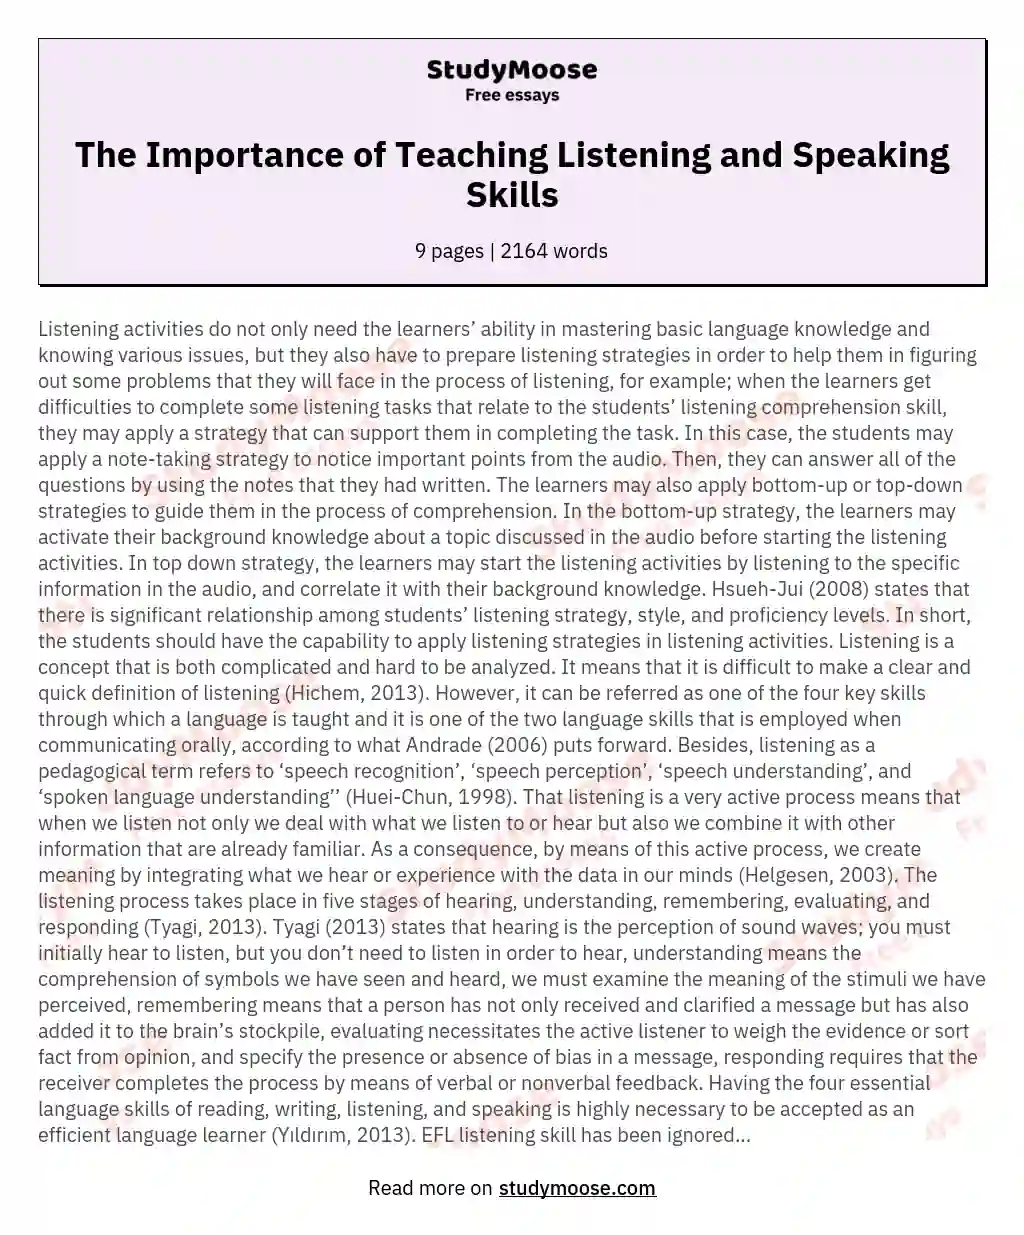 The Importance of Teaching Listening and Speaking Skills